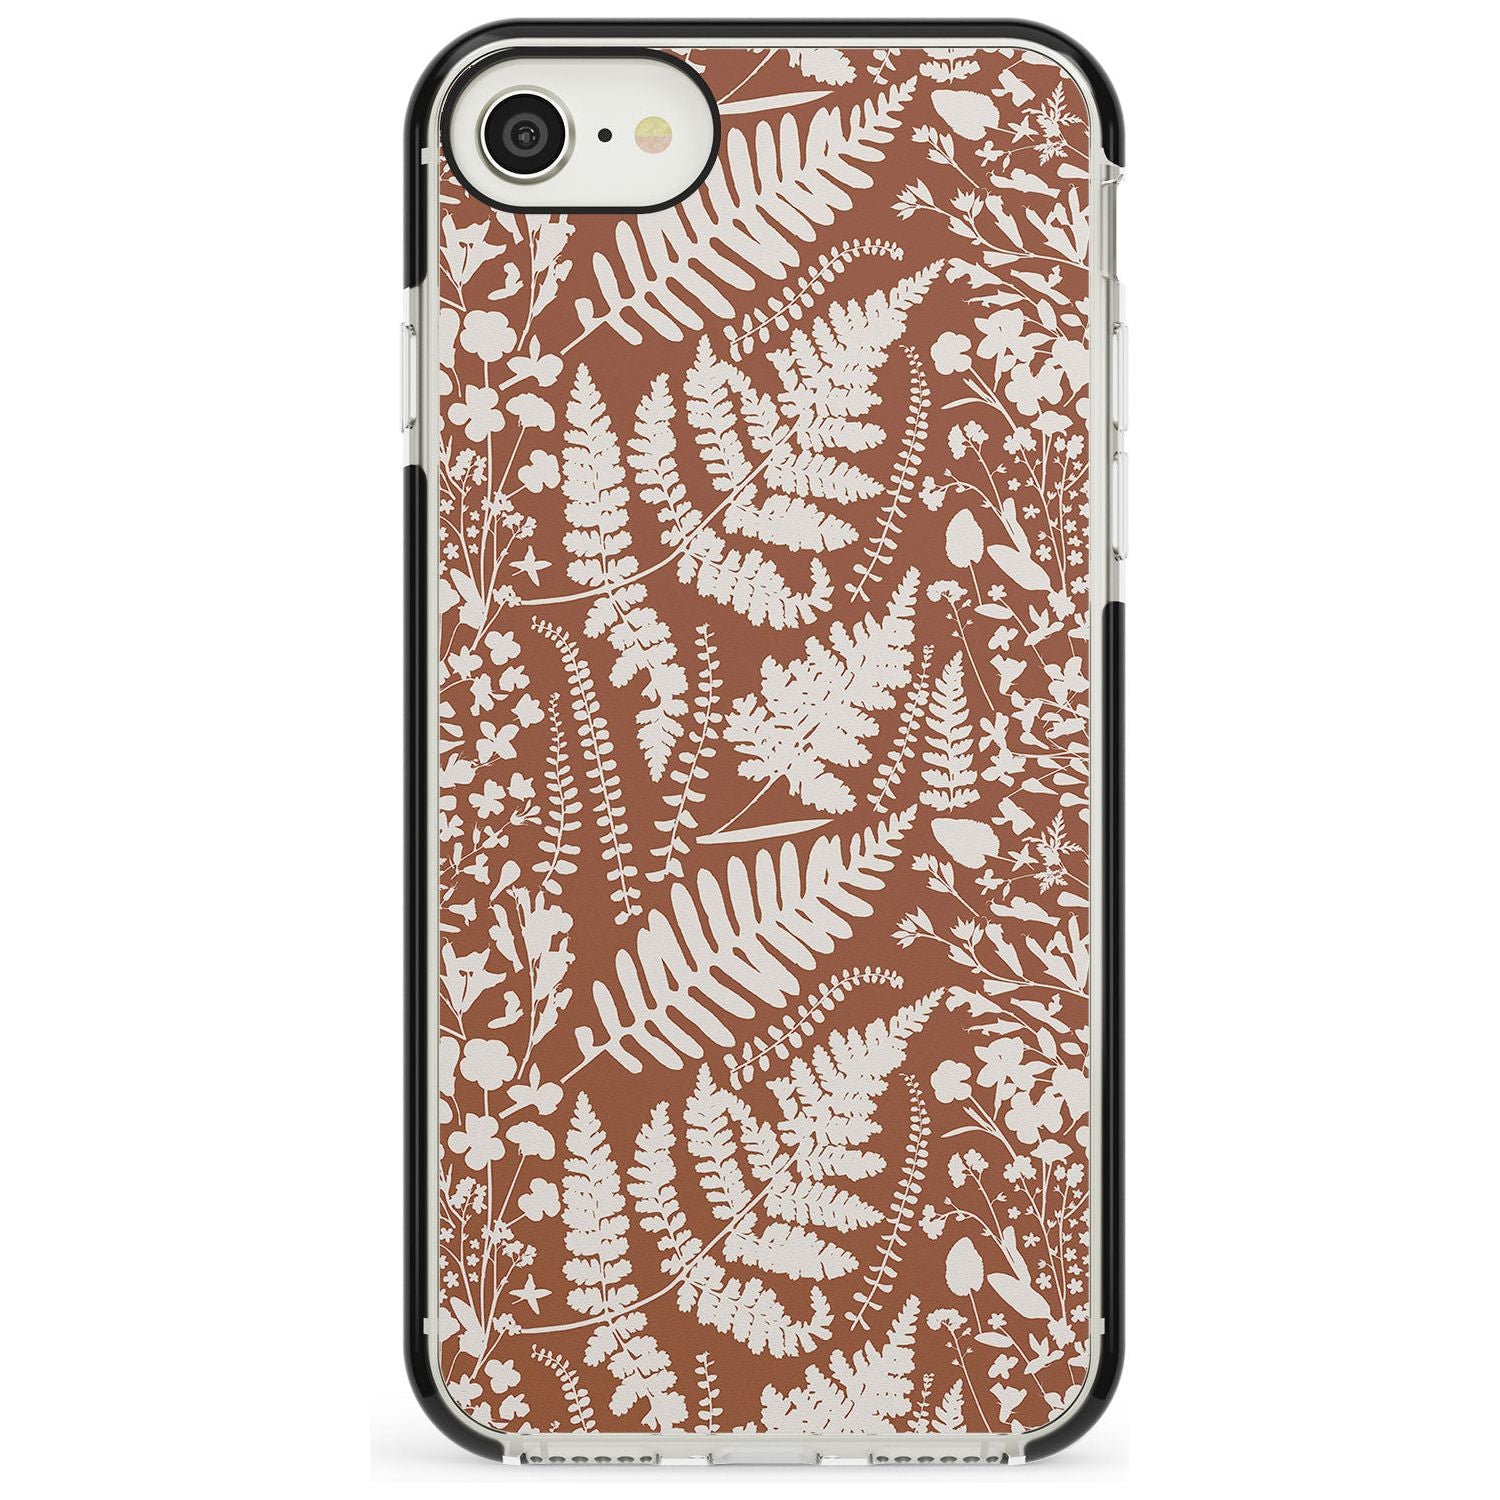 Wildflowers and Ferns on Terracotta Black Impact Phone Case for iPhone SE 8 7 Plus